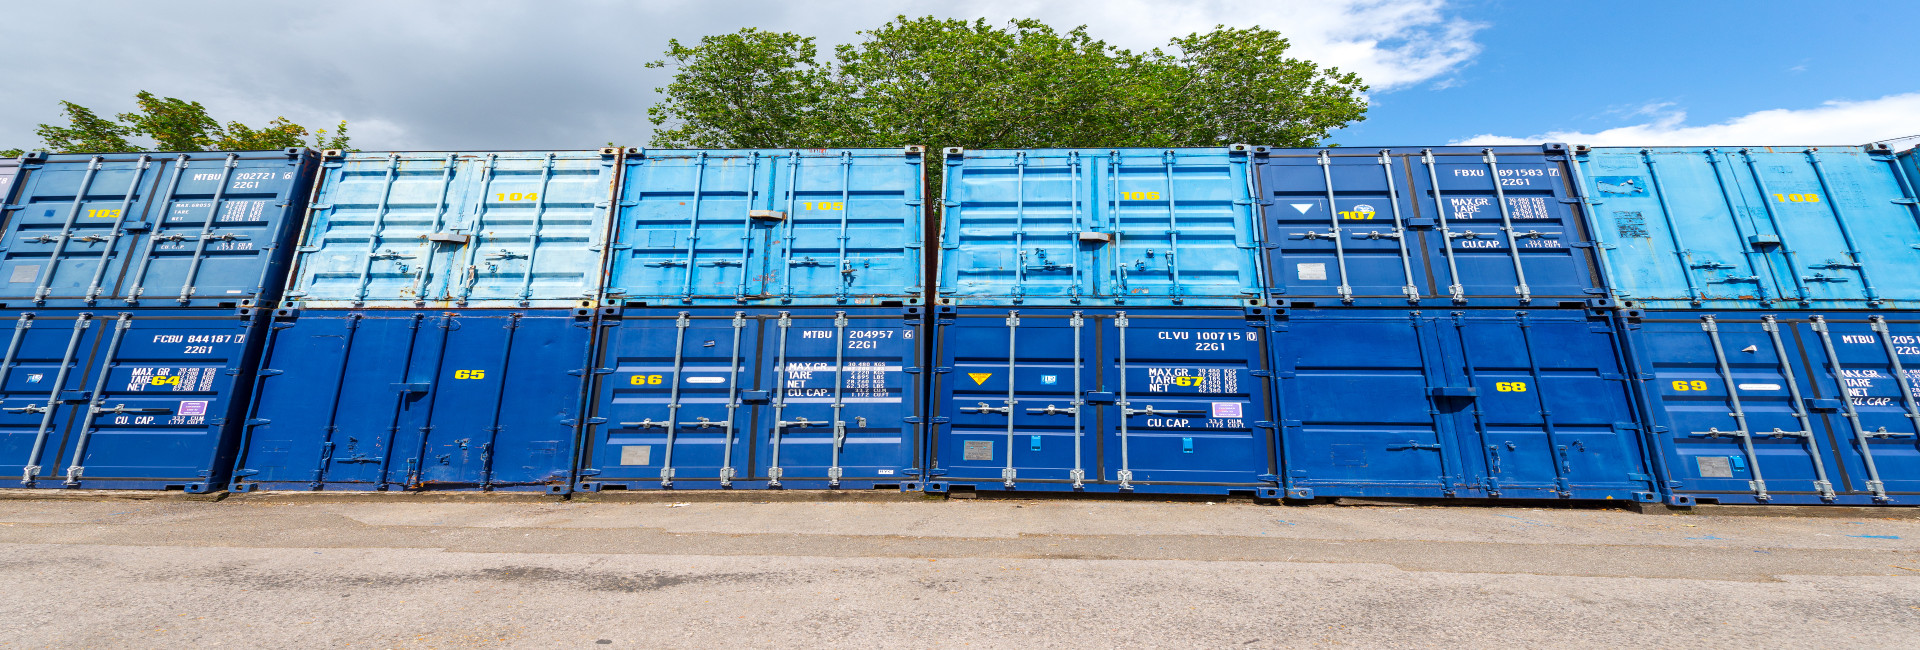 Self storage containers at our depot